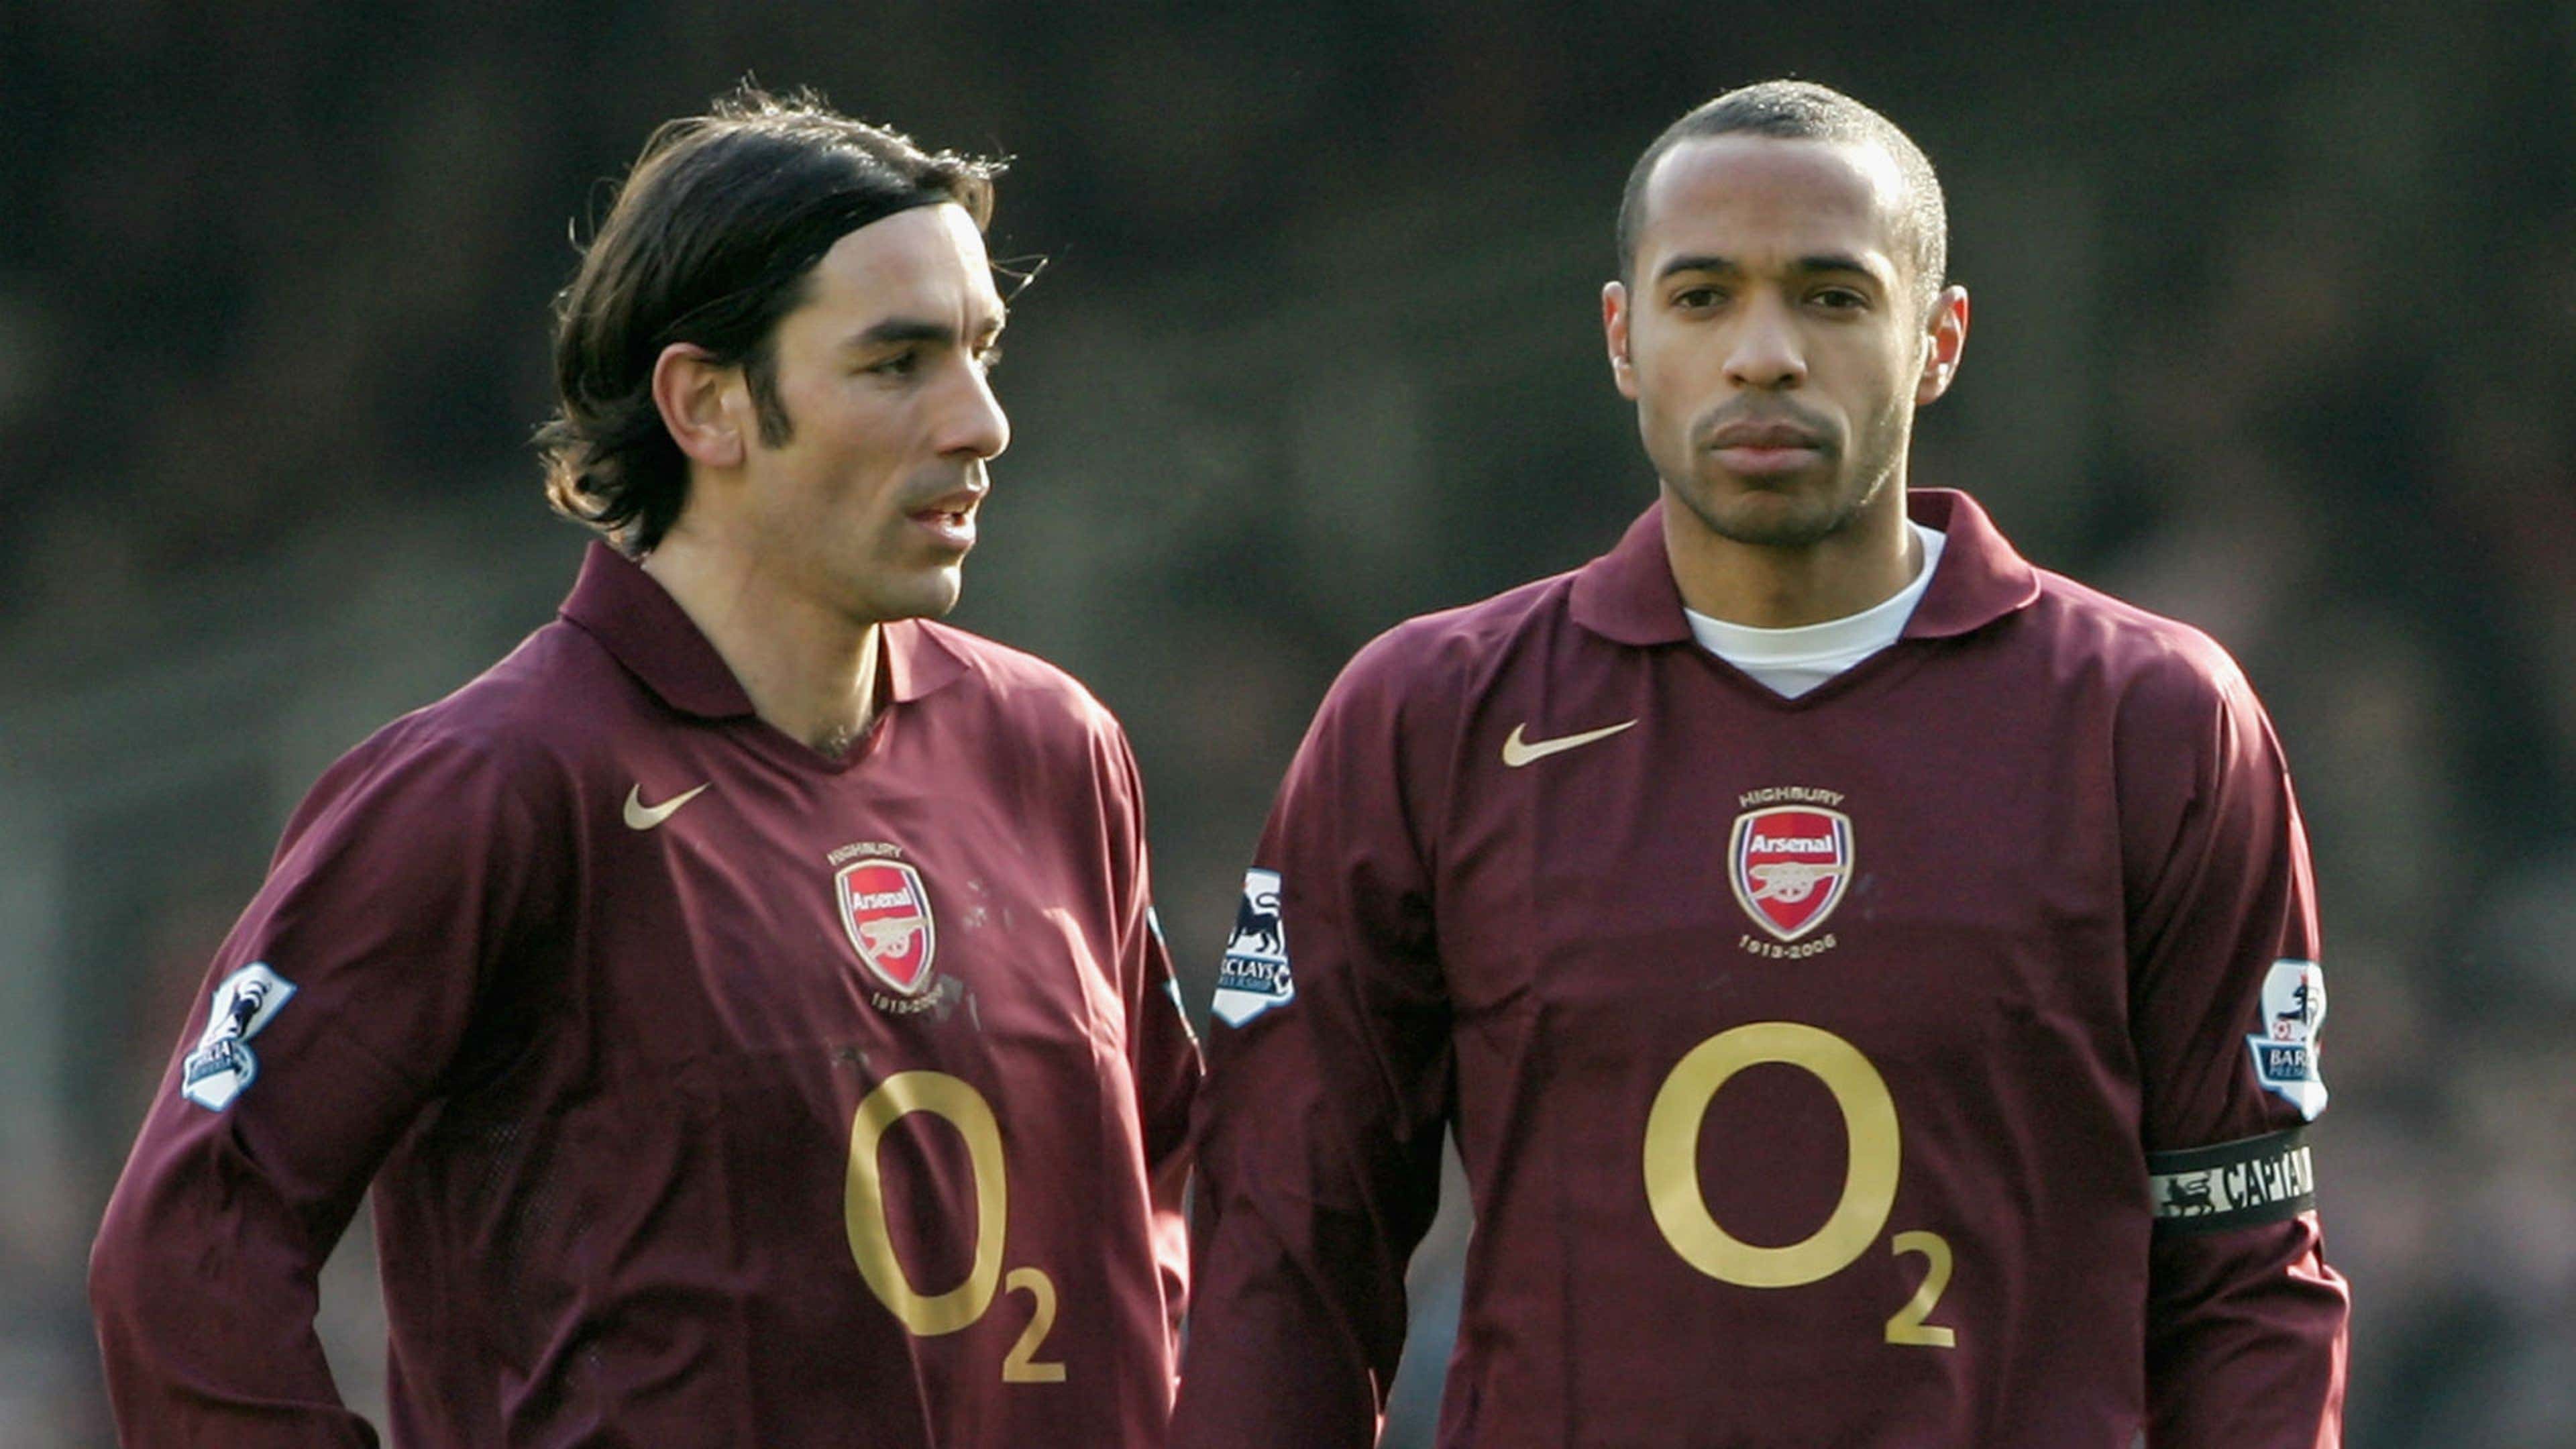 Arsenal news: Thierry Henry reveals he turned down TRIPLE his